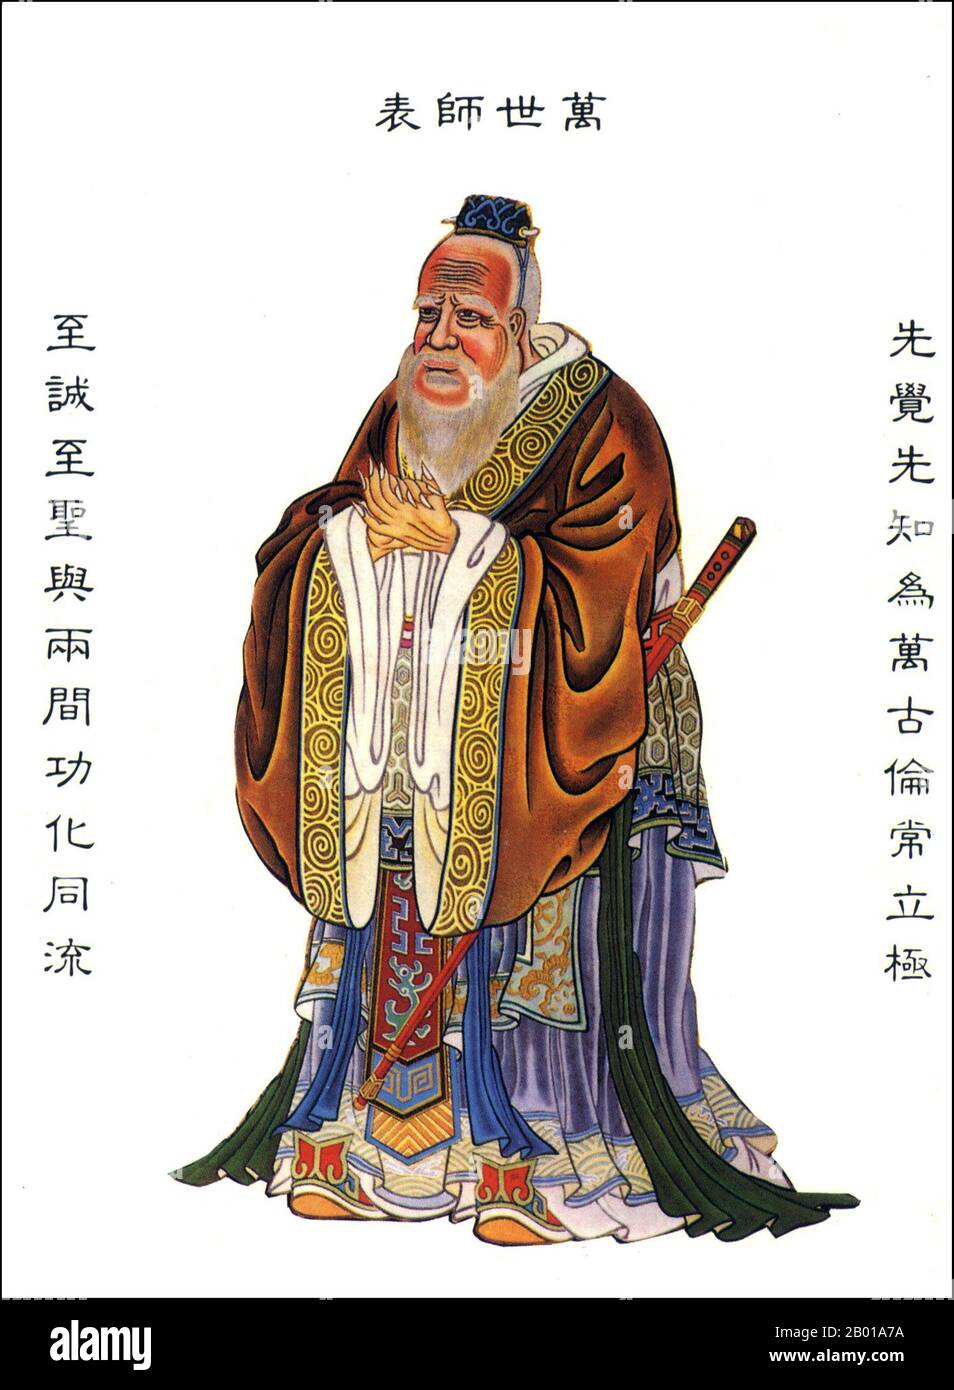 China: Confucius (551– 479 BCE), celebrated Chinese philosopher of the Spring and Autumn Period. Illustration, c. 19th century.  The philosophy of Confucius (Kong Zi, K'ung-tzu, K'ung-fu-tzu) emphasises personal and governmental morality, correctness of social relationships, justice and sincerity. These values gained prominence in China during the Han Dynasty (206 BC – 220 AD). Confucius' thoughts have been developed into a system of philosophy known as Confucianism. It was introduced to Europe by the Italian Jesuit Matteo Ricci, who was the first to Latinise the name as 'Confucius'. Stock Photo